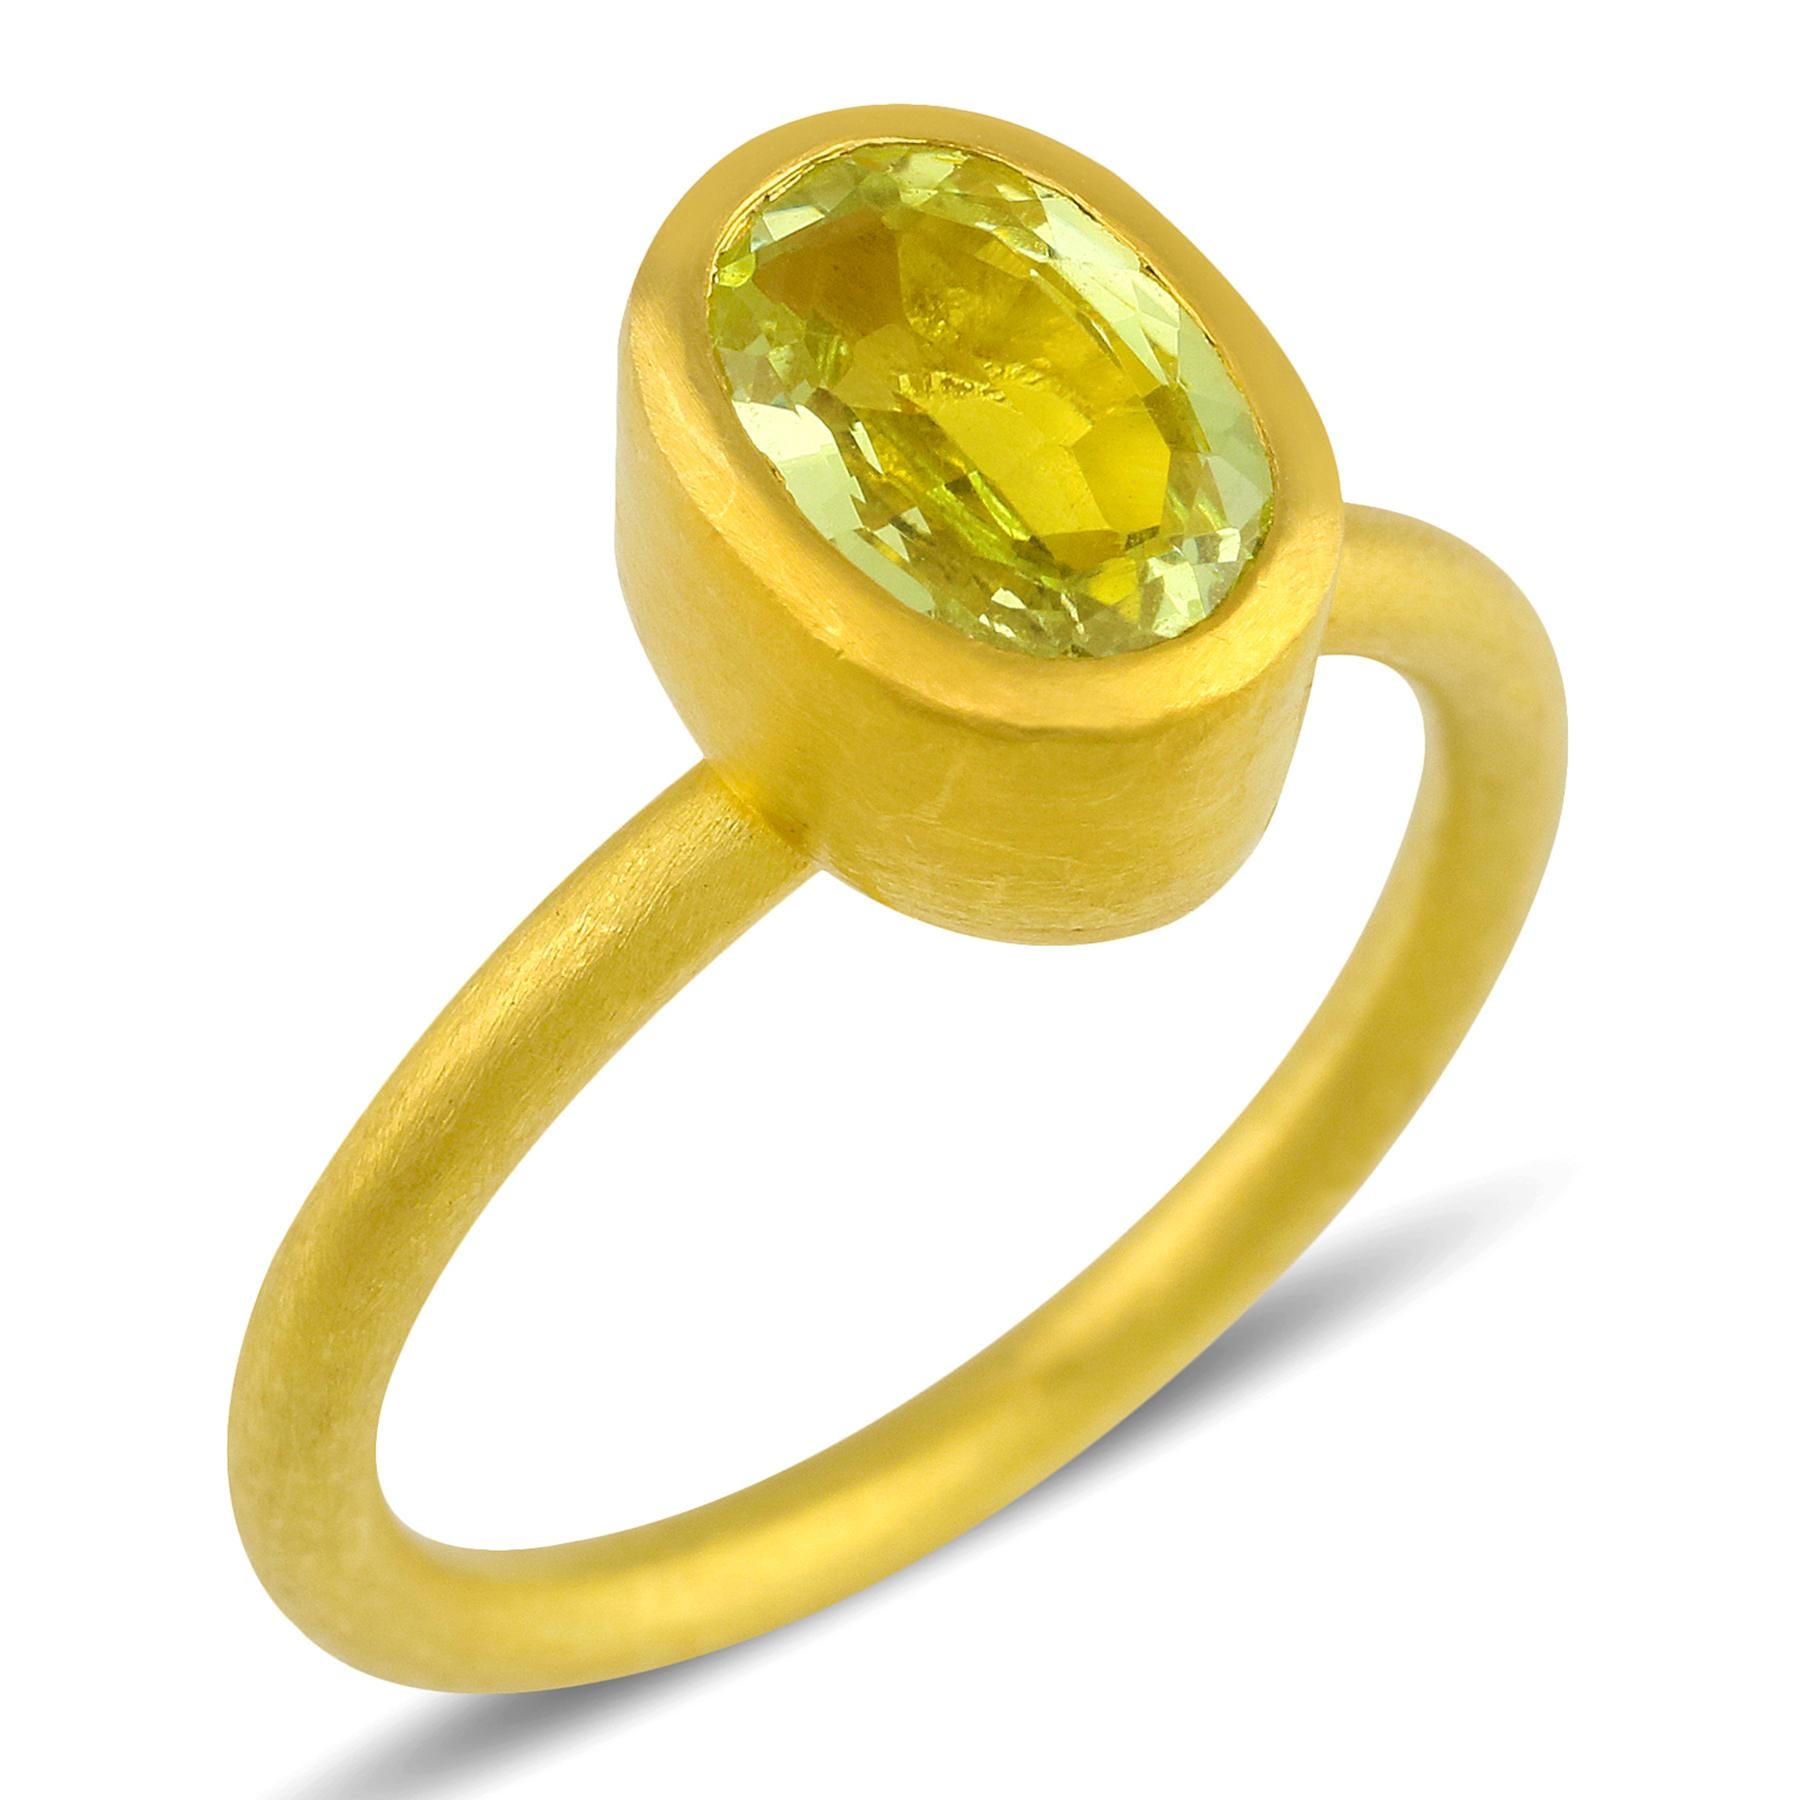 PHILIPPE-SPENCER -  1.85 Ct. Light Green Alexandrite wrapped in 22K Gold Bezel with Solid Round 20K Gold Ring. Brushed Matte Finish. Size 6 1/8, and is in-stock and ready to ship. Our apologies in advance, this One-Of-A-Kind Solitaire is not